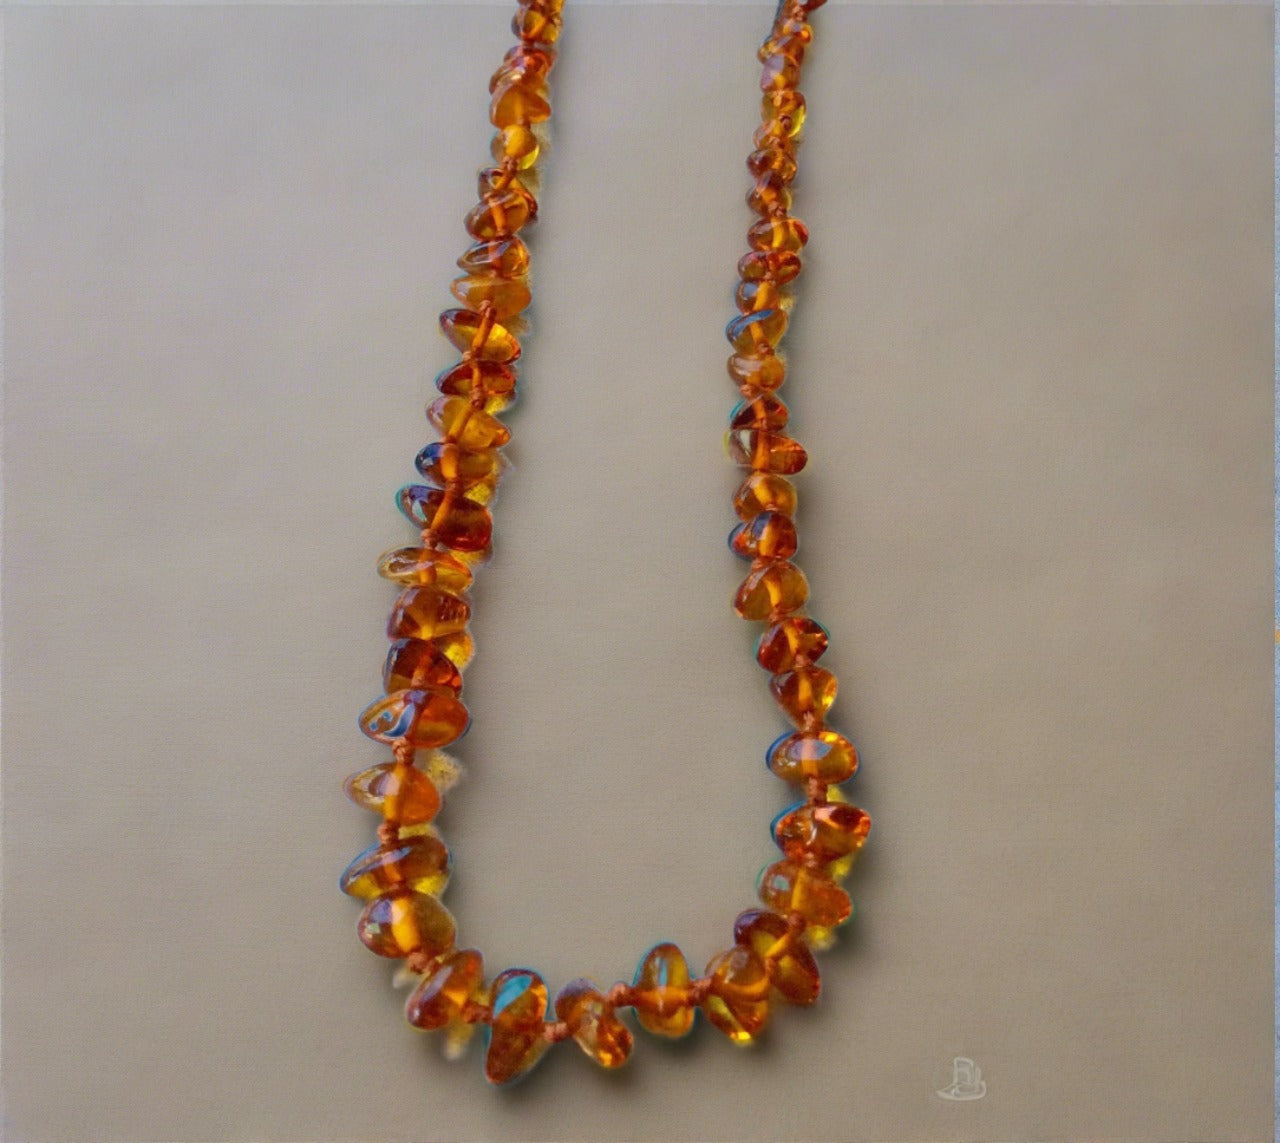 baltic amber baby teething necklace